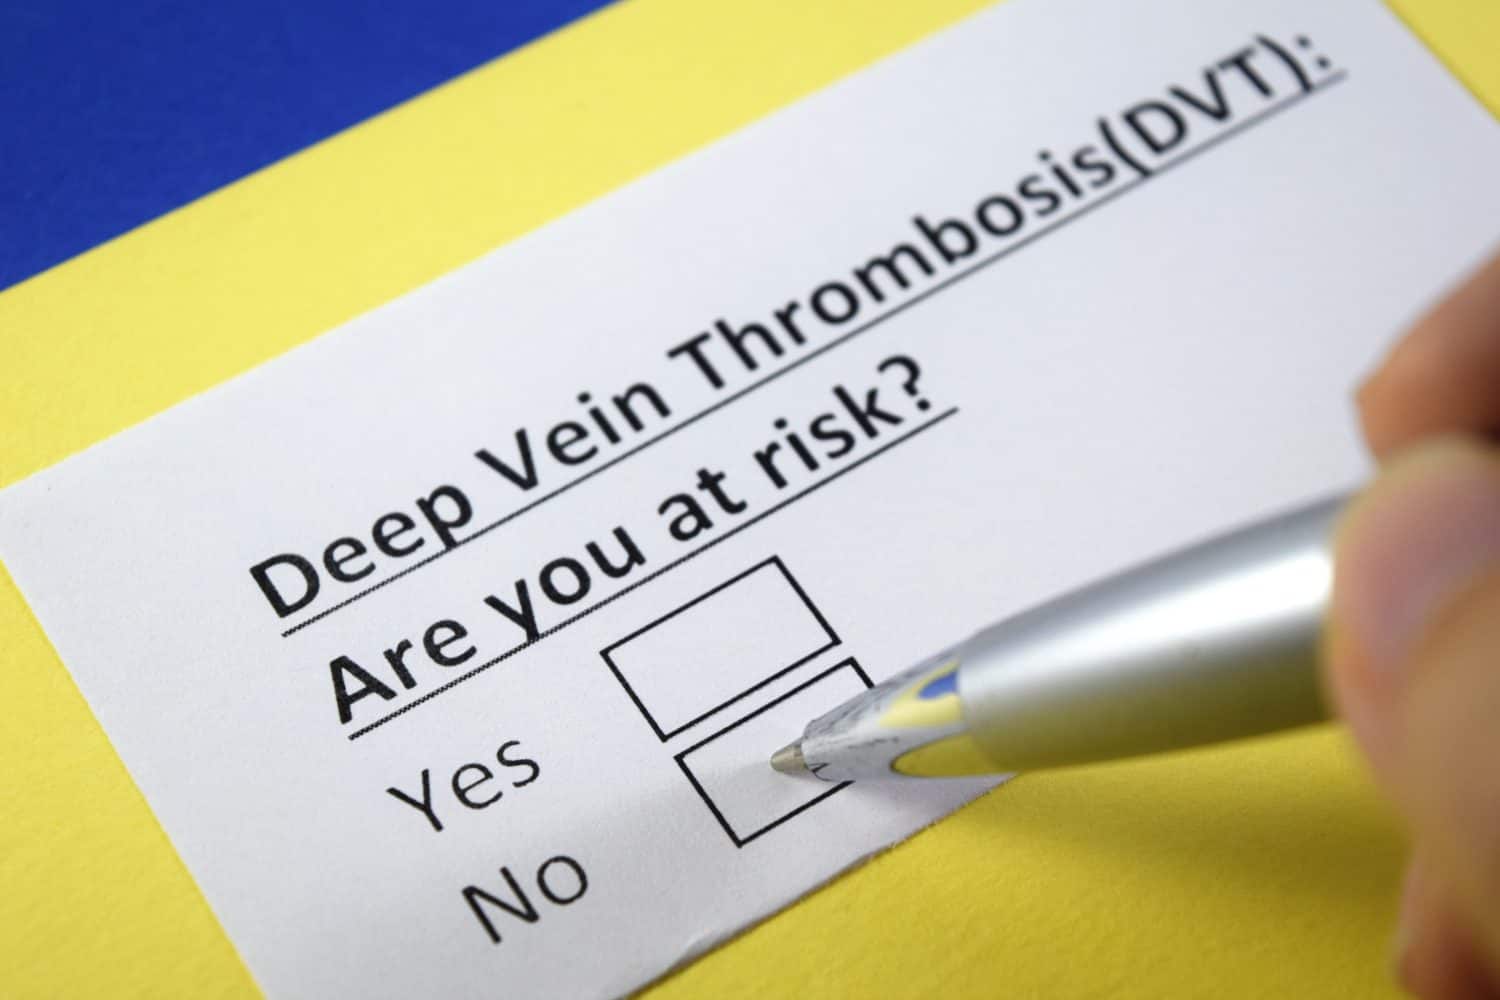 Deep vein thrombosis: Are you at risk? Yes